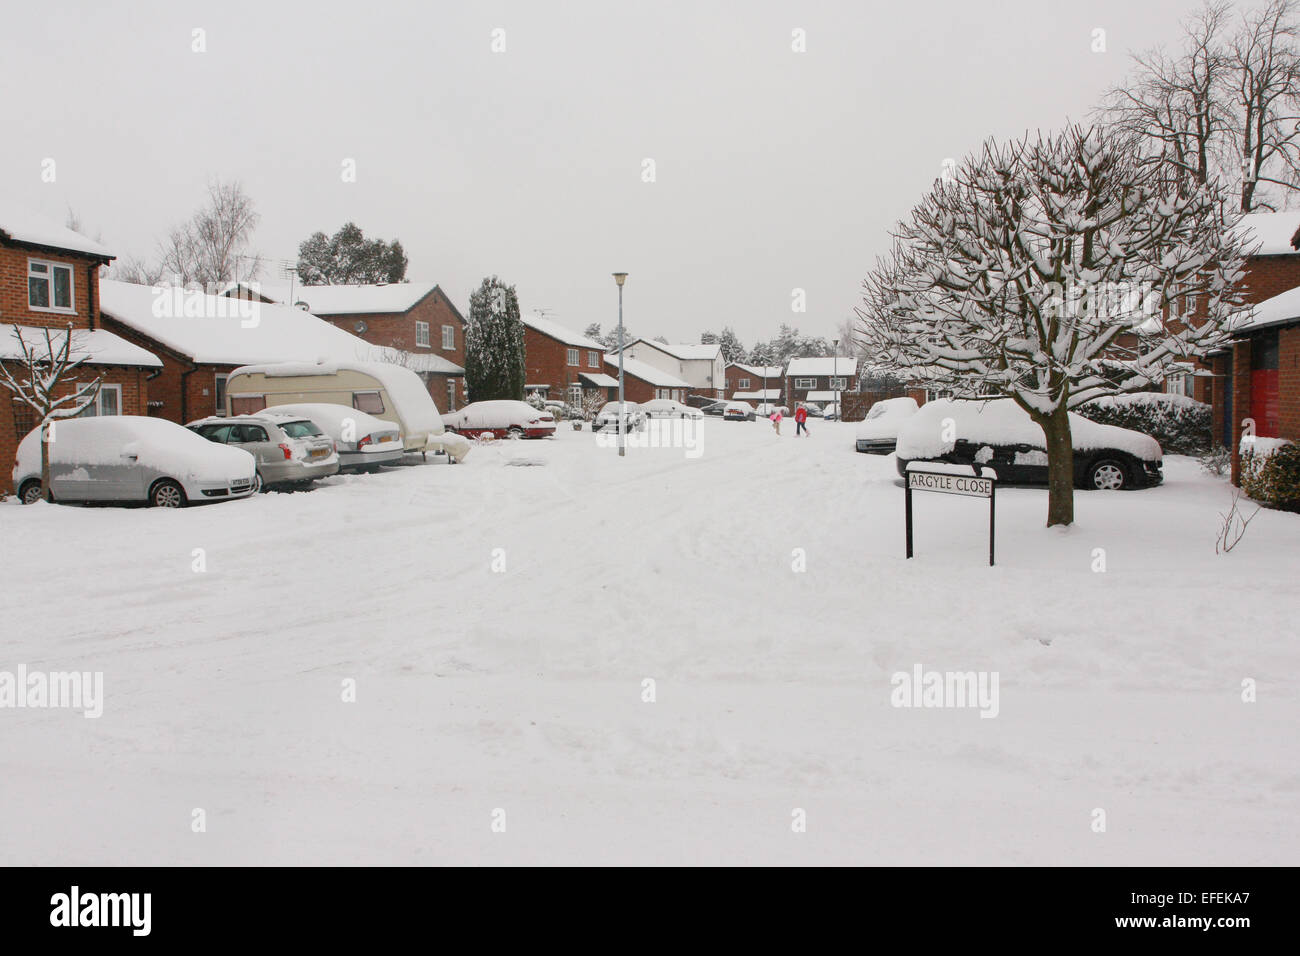 Argyle Close, Whitehill, Bordon, Hampshire, England covered in snow from 2009. Stock Photo